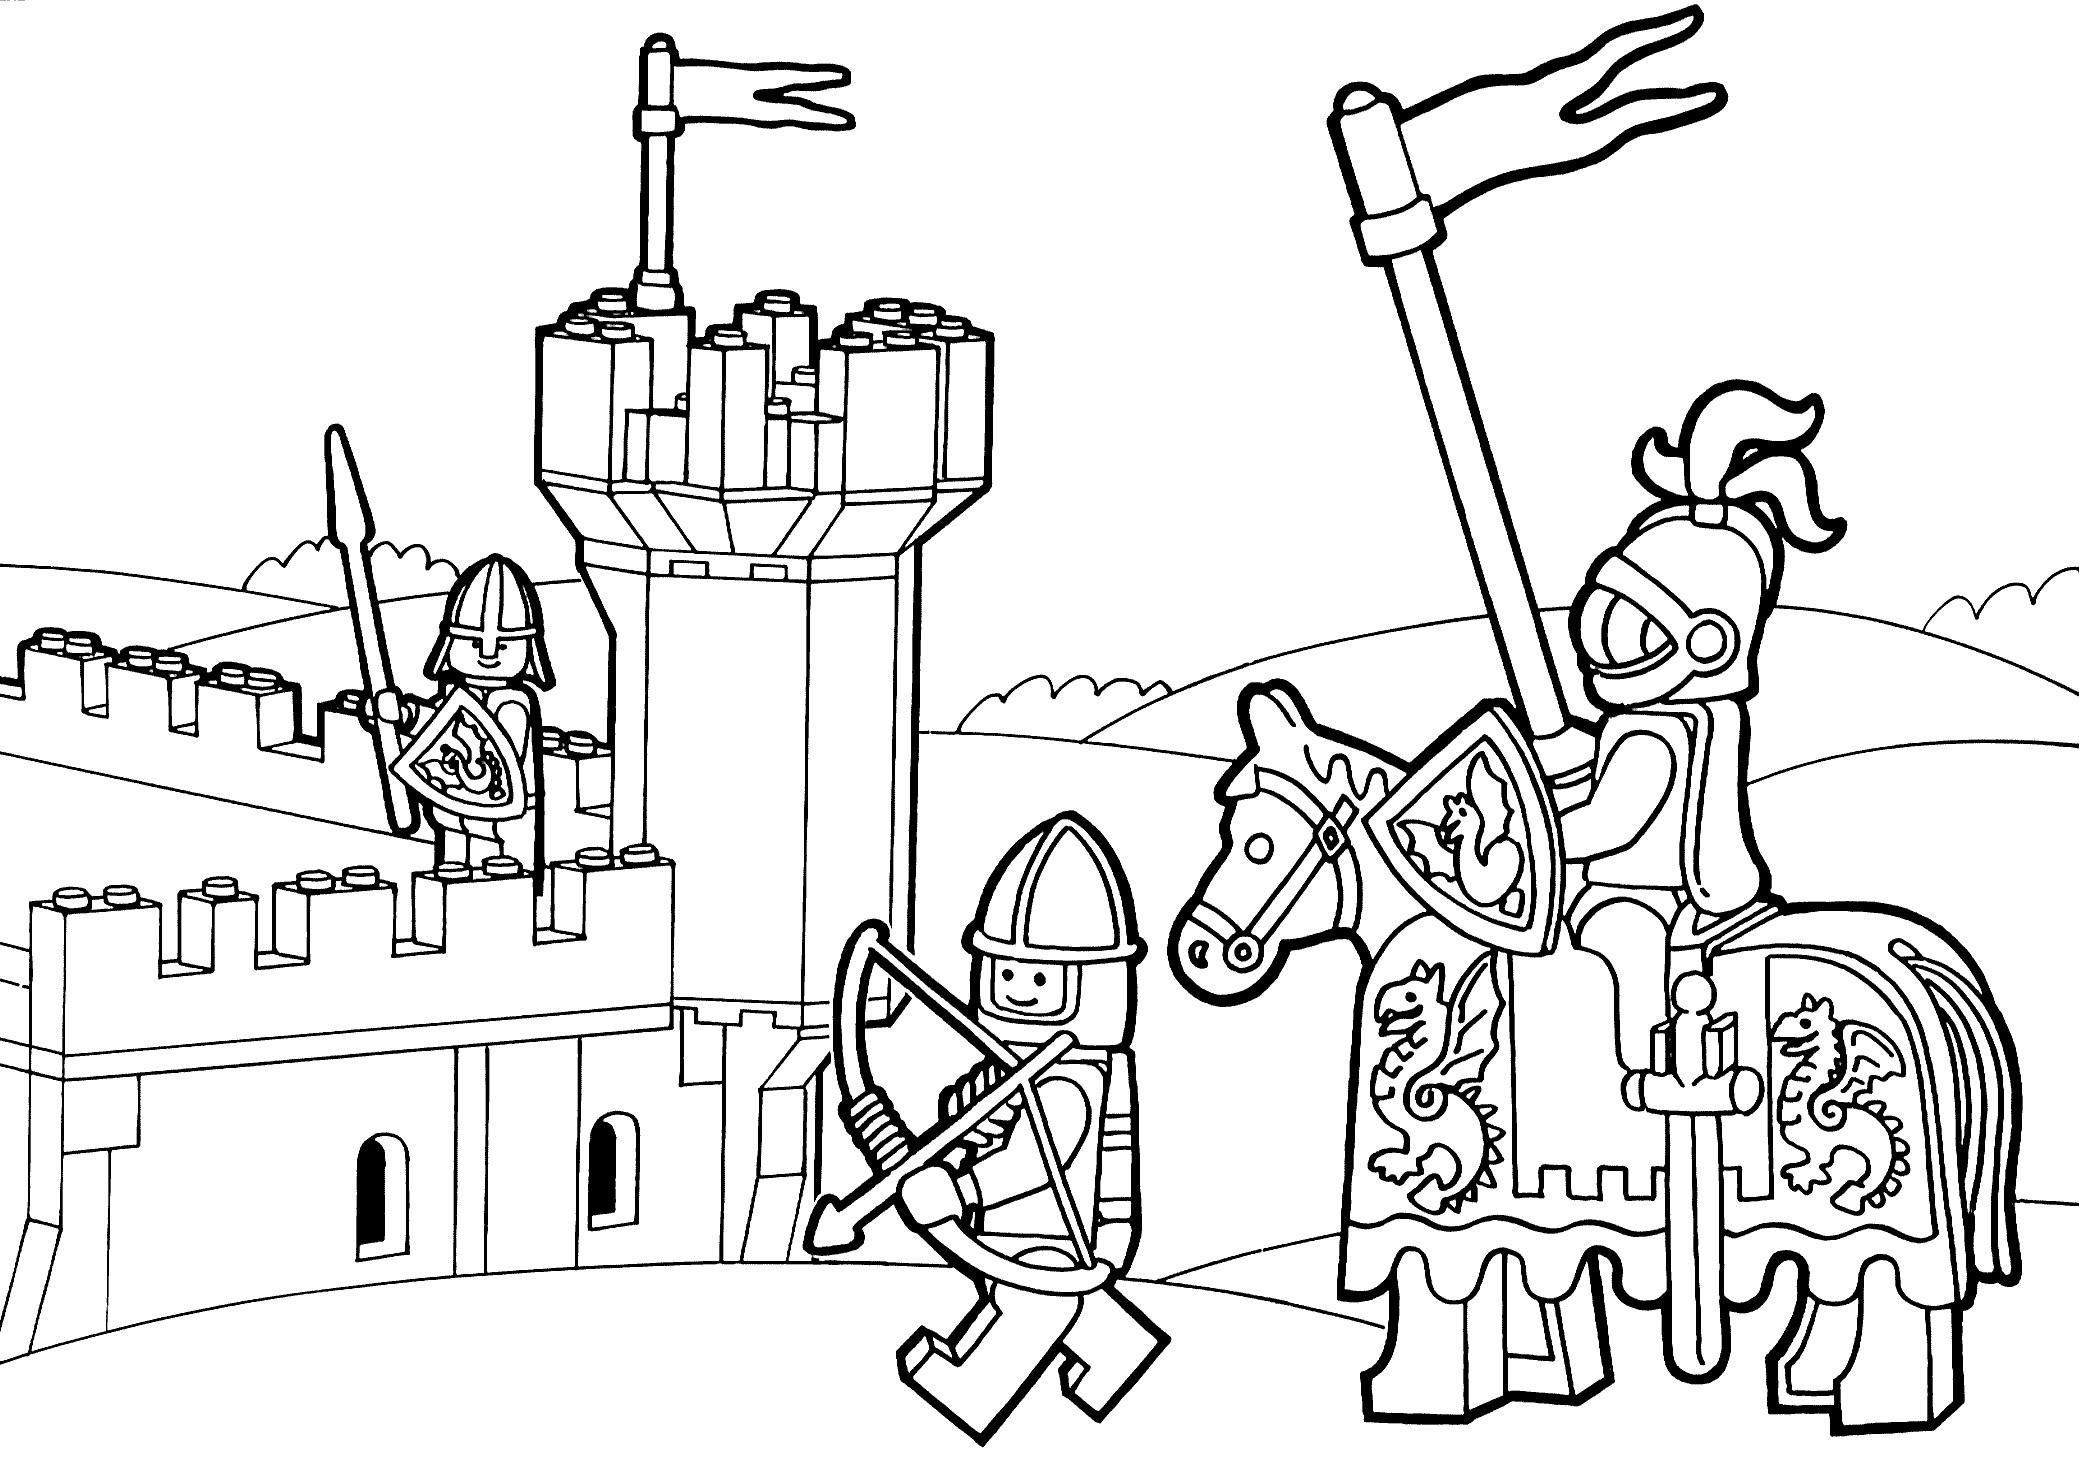 Coloring Pages For Kids Lego
 Lego Duplo knights coloring page for kids printable free